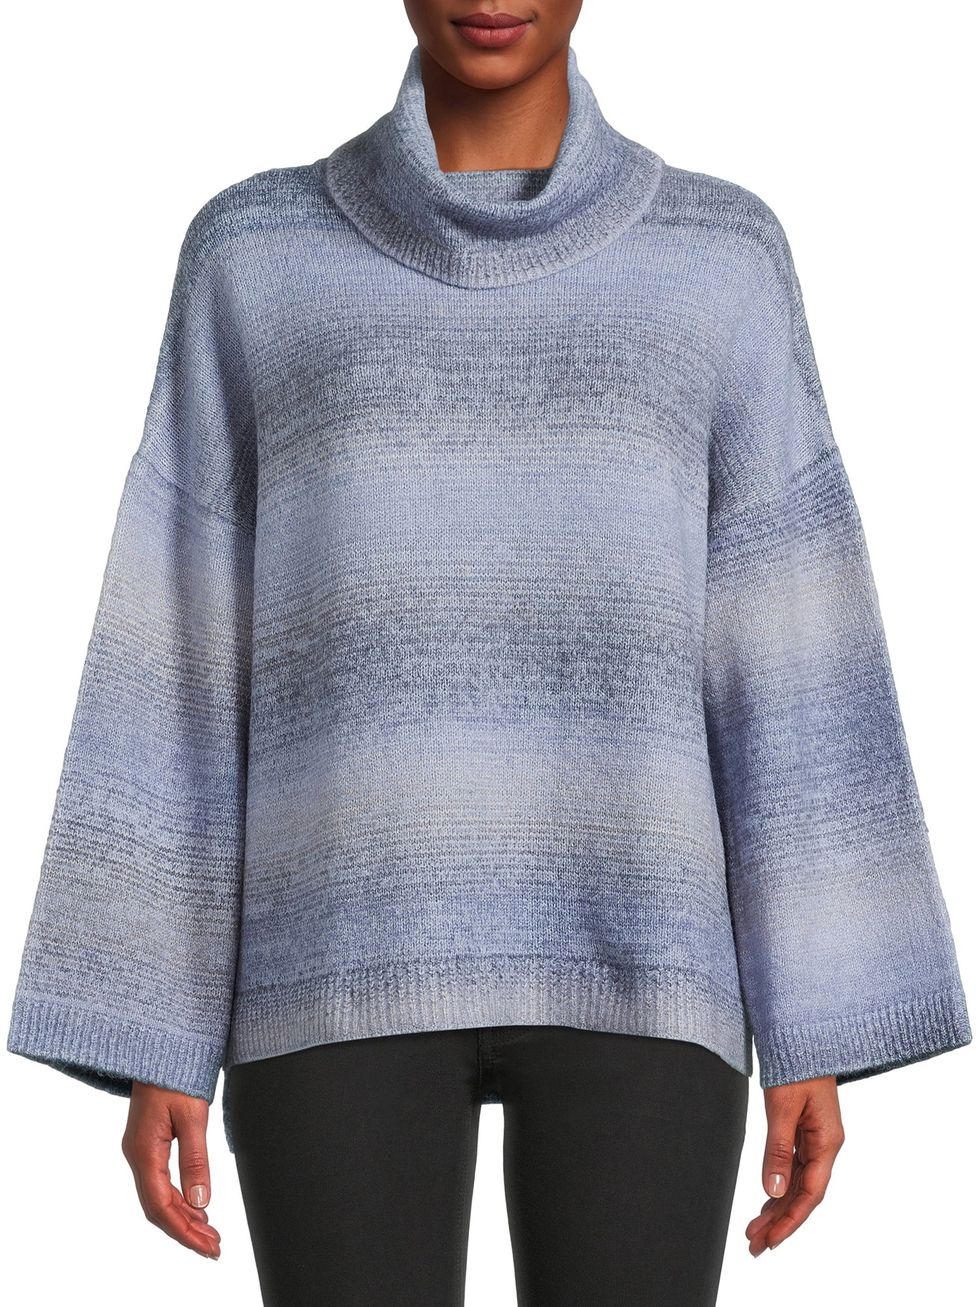 Women s Ombre Cowl Neck Long Sleeve Sweater